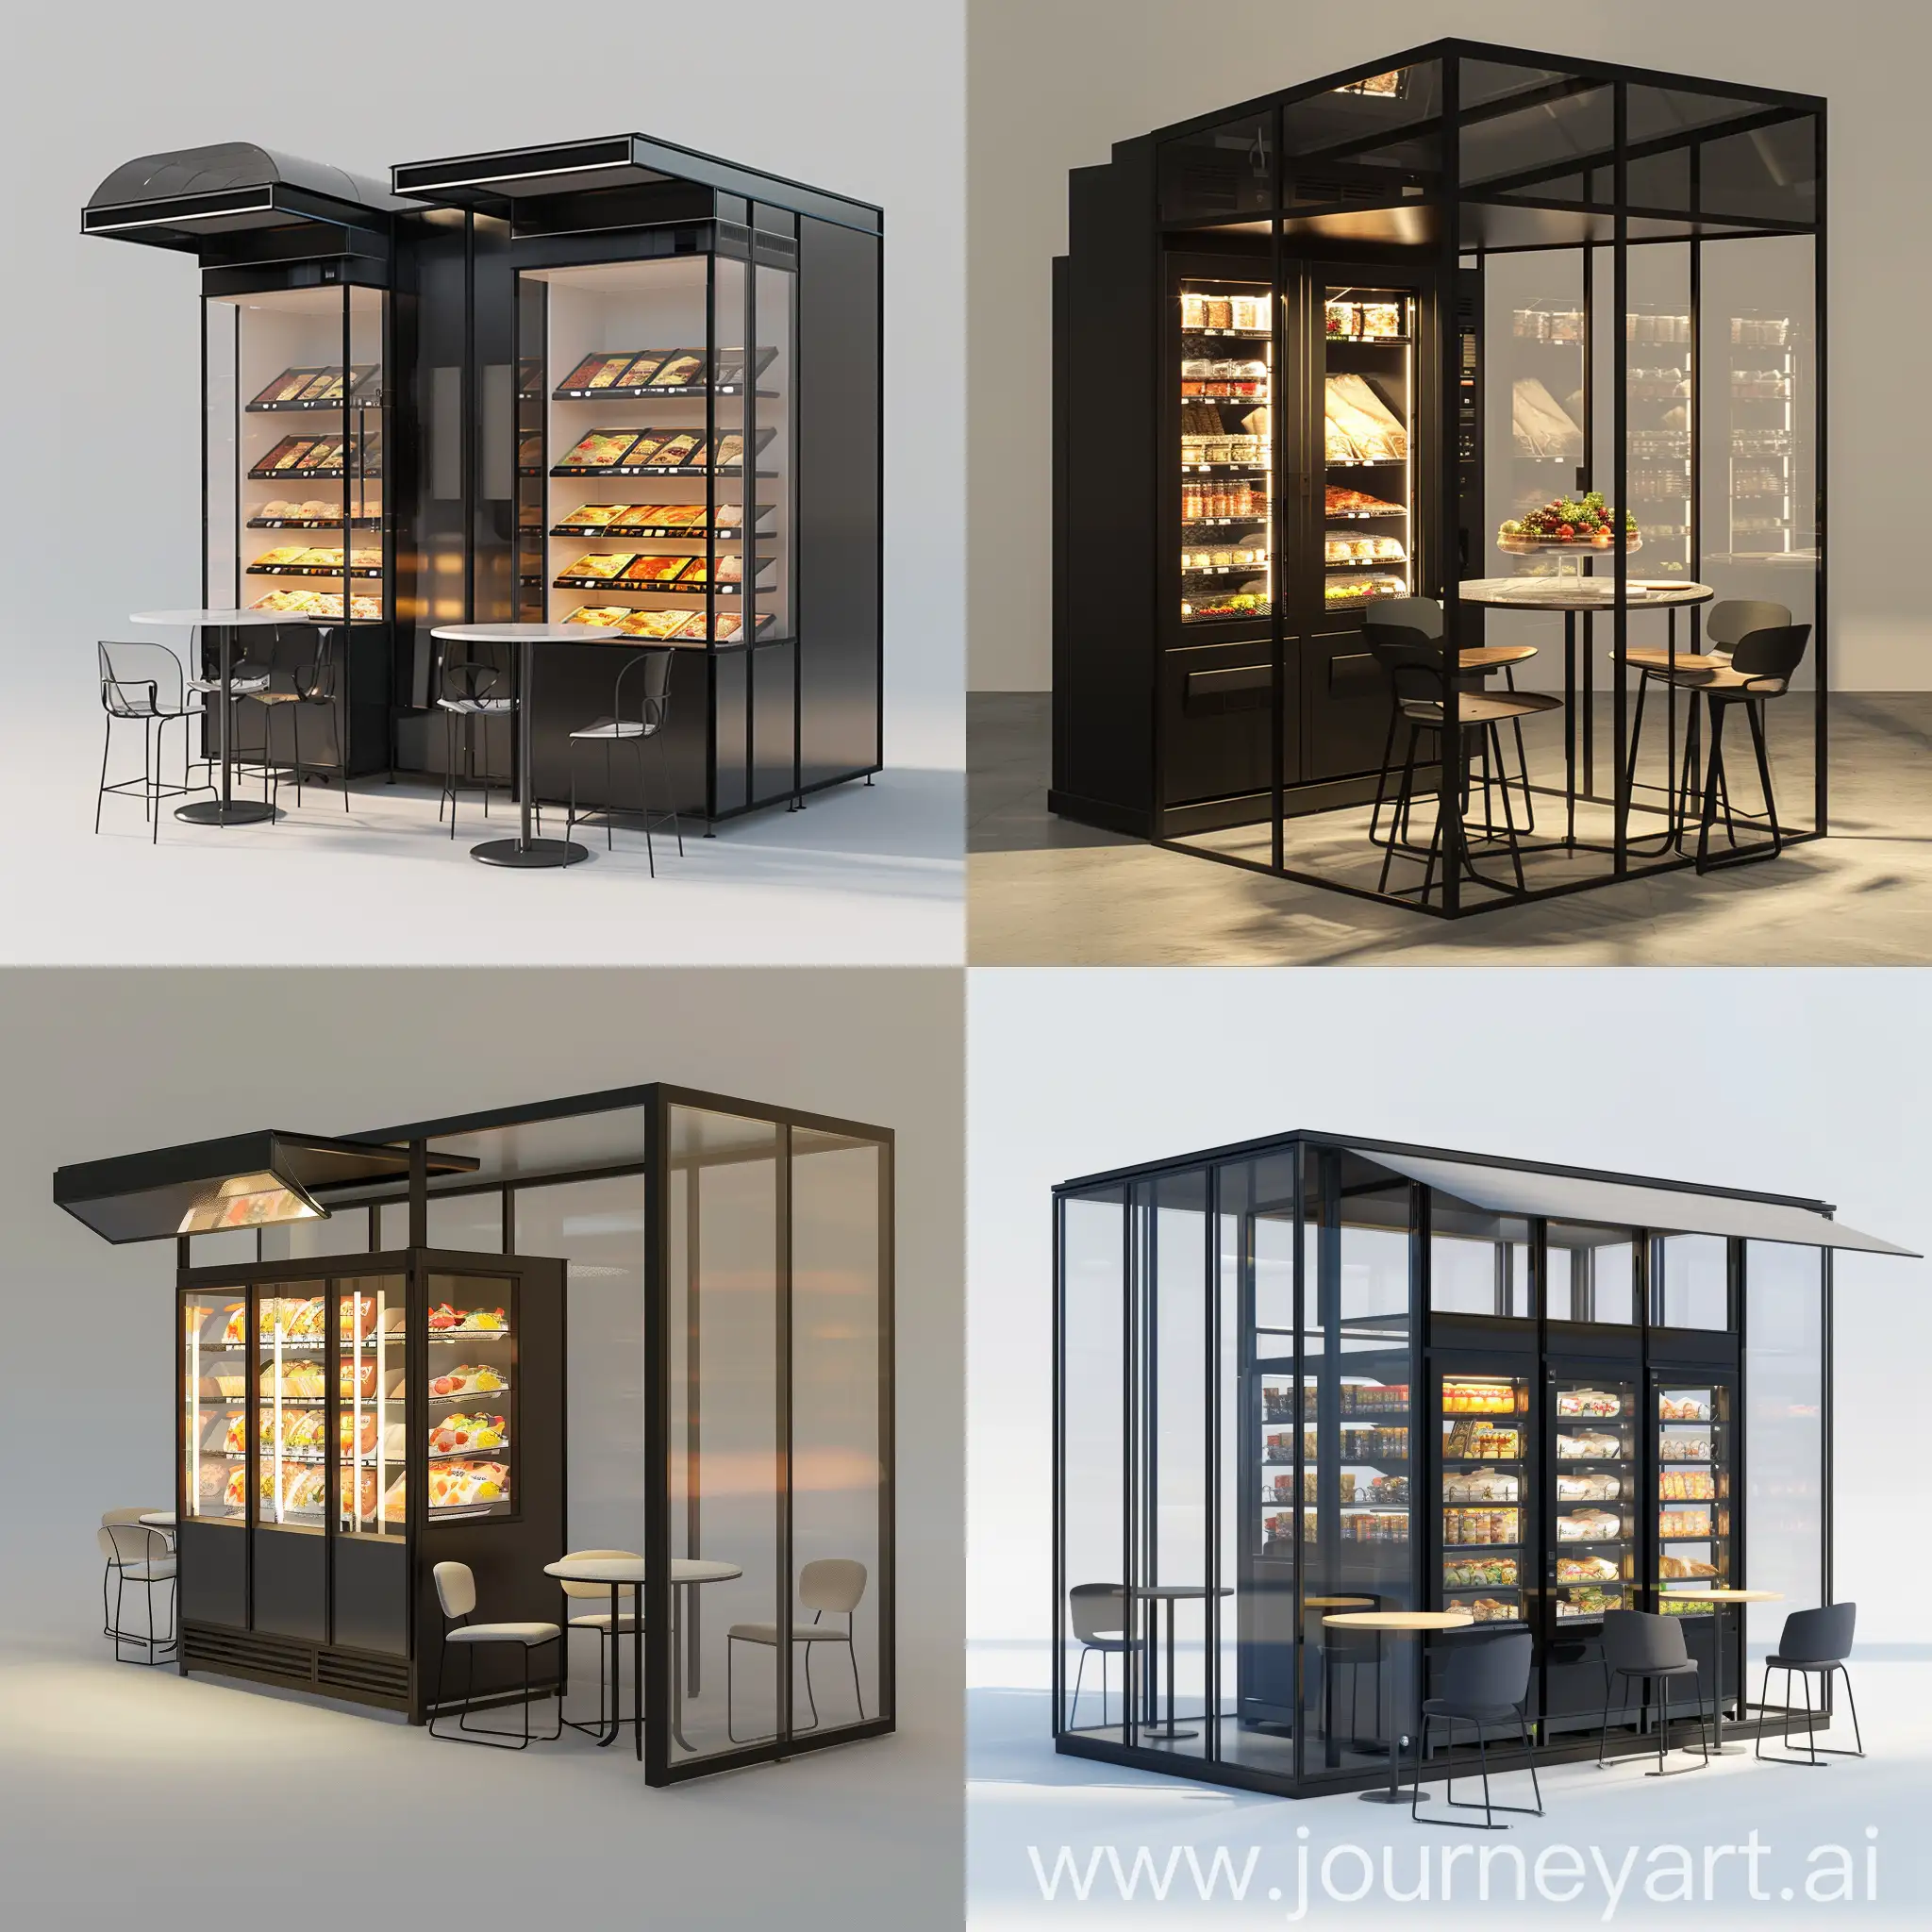 Modern-Black-Glass-Frozen-Food-Vending-Machine-with-Canopy-and-Tables